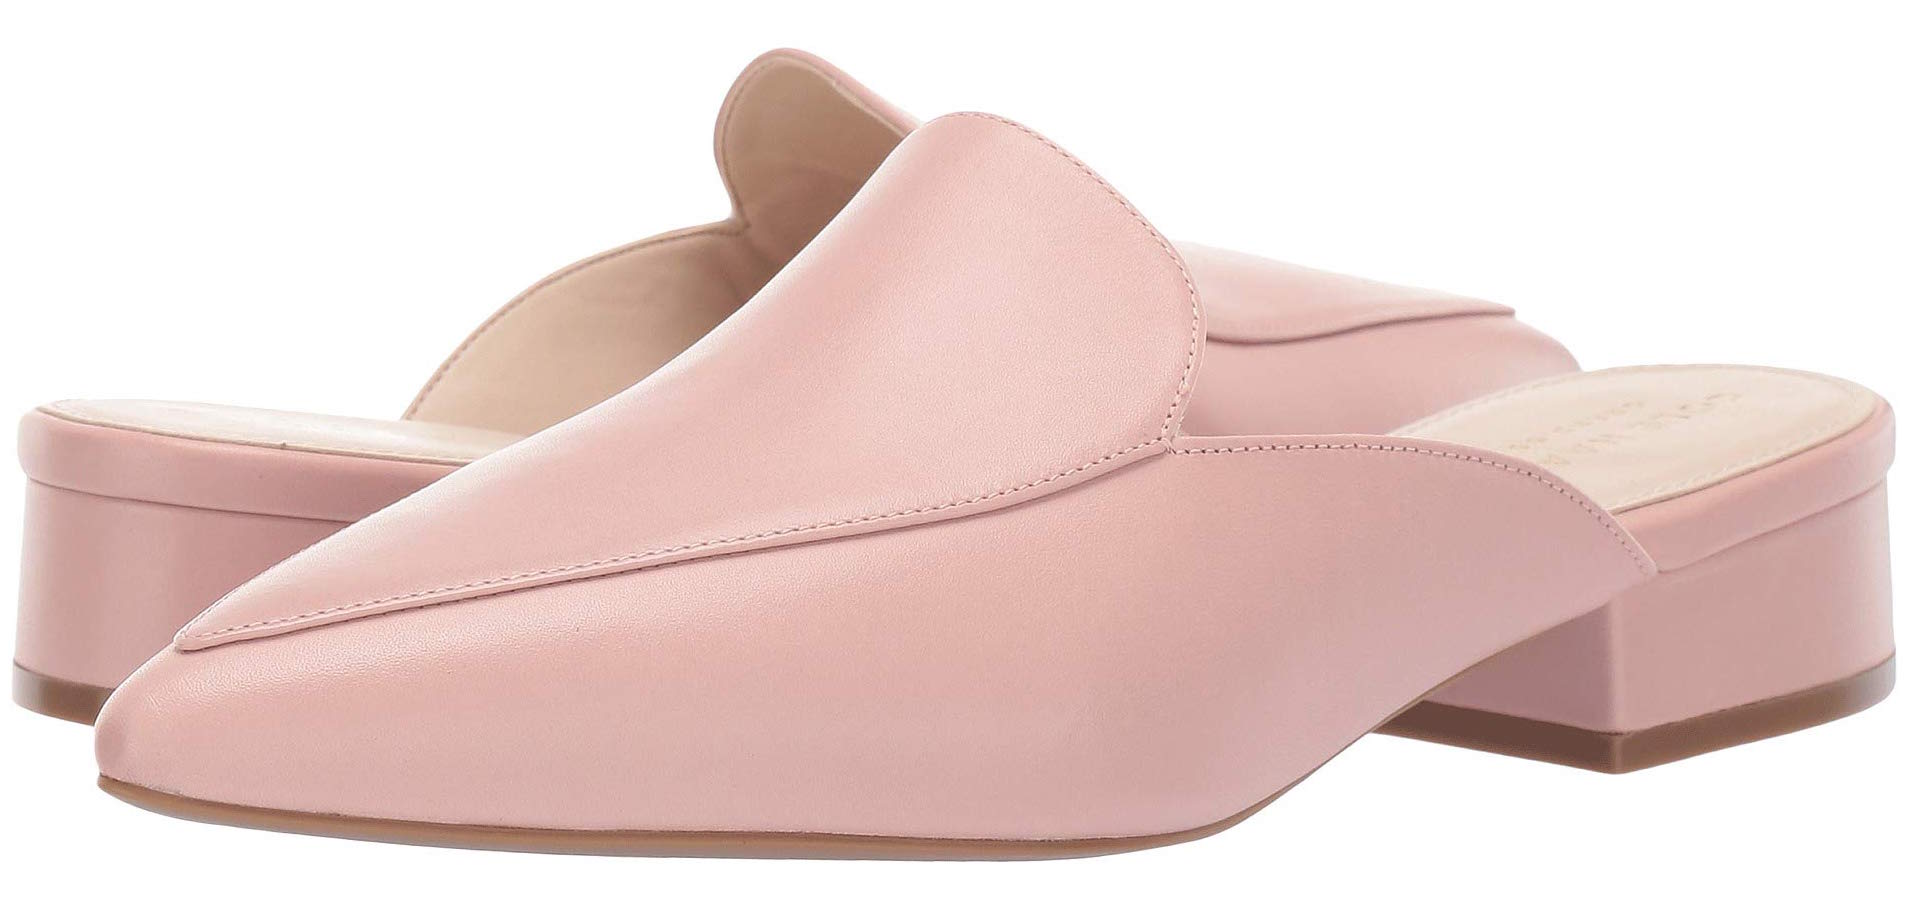 Cole Haan Mules Are on Sale & We're Already Thinking of Spring